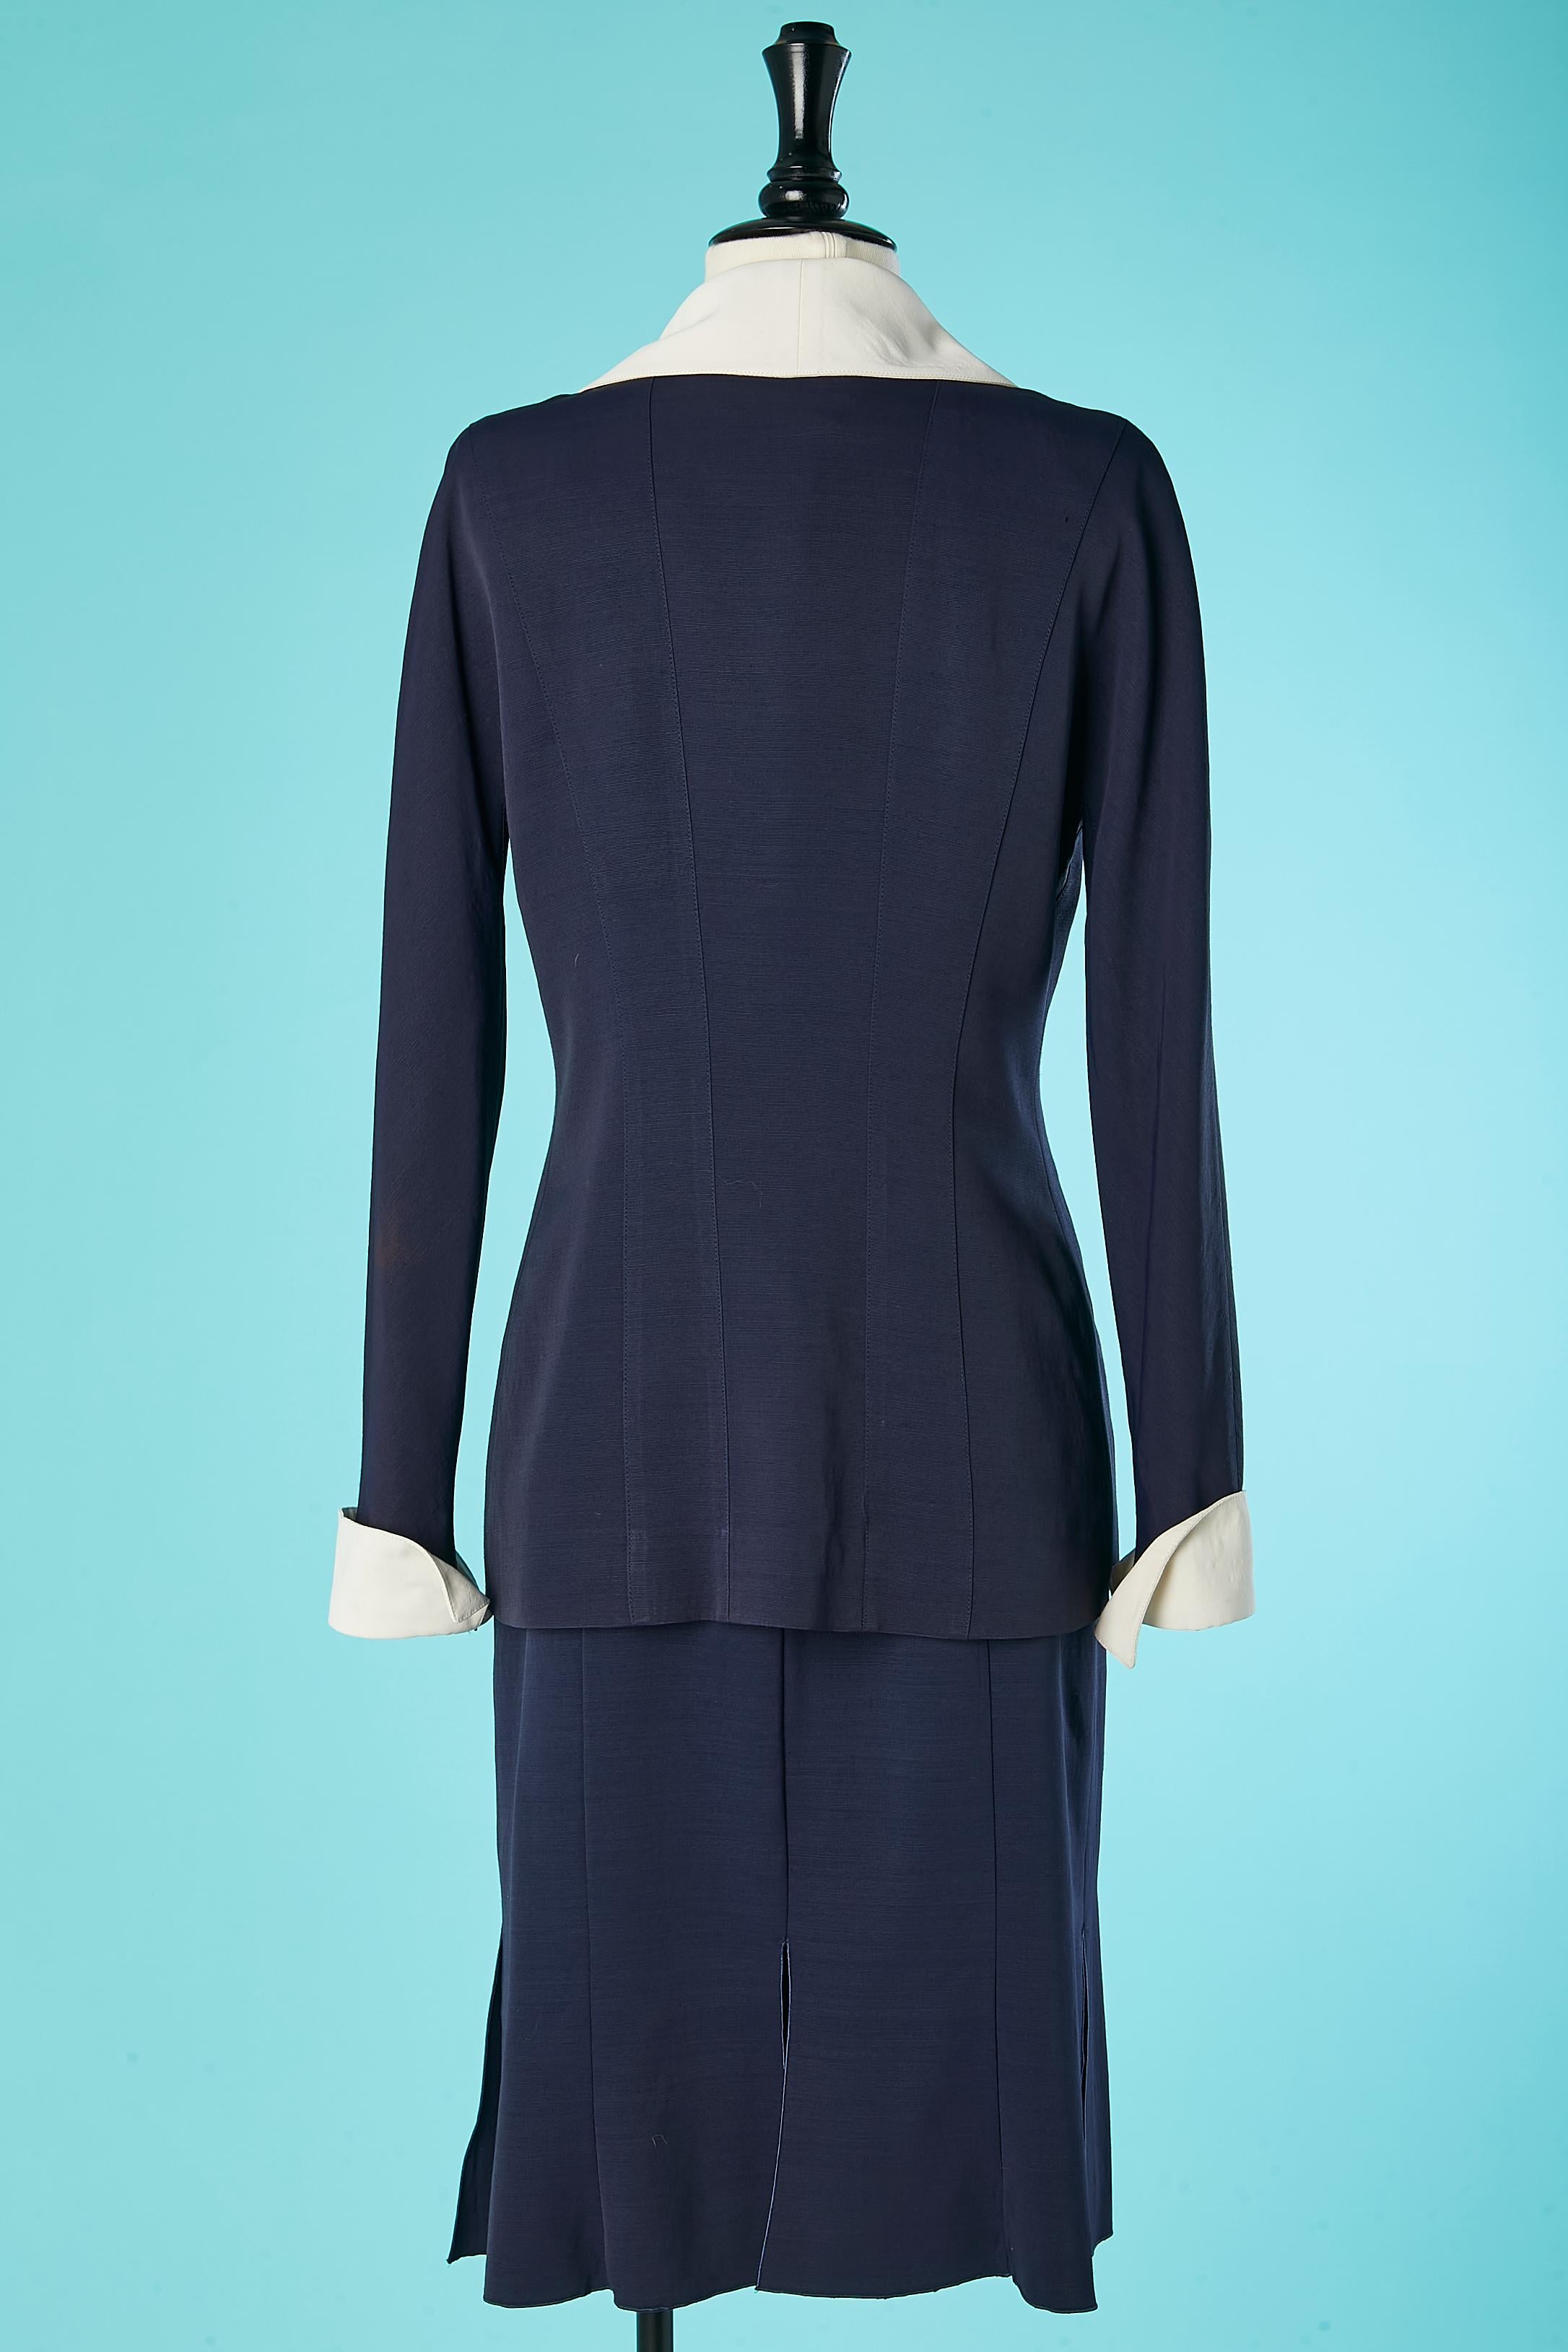 Women's Navy blue skirt suit with white details Karl Lagerfeld for Bergdorf Goodman  For Sale